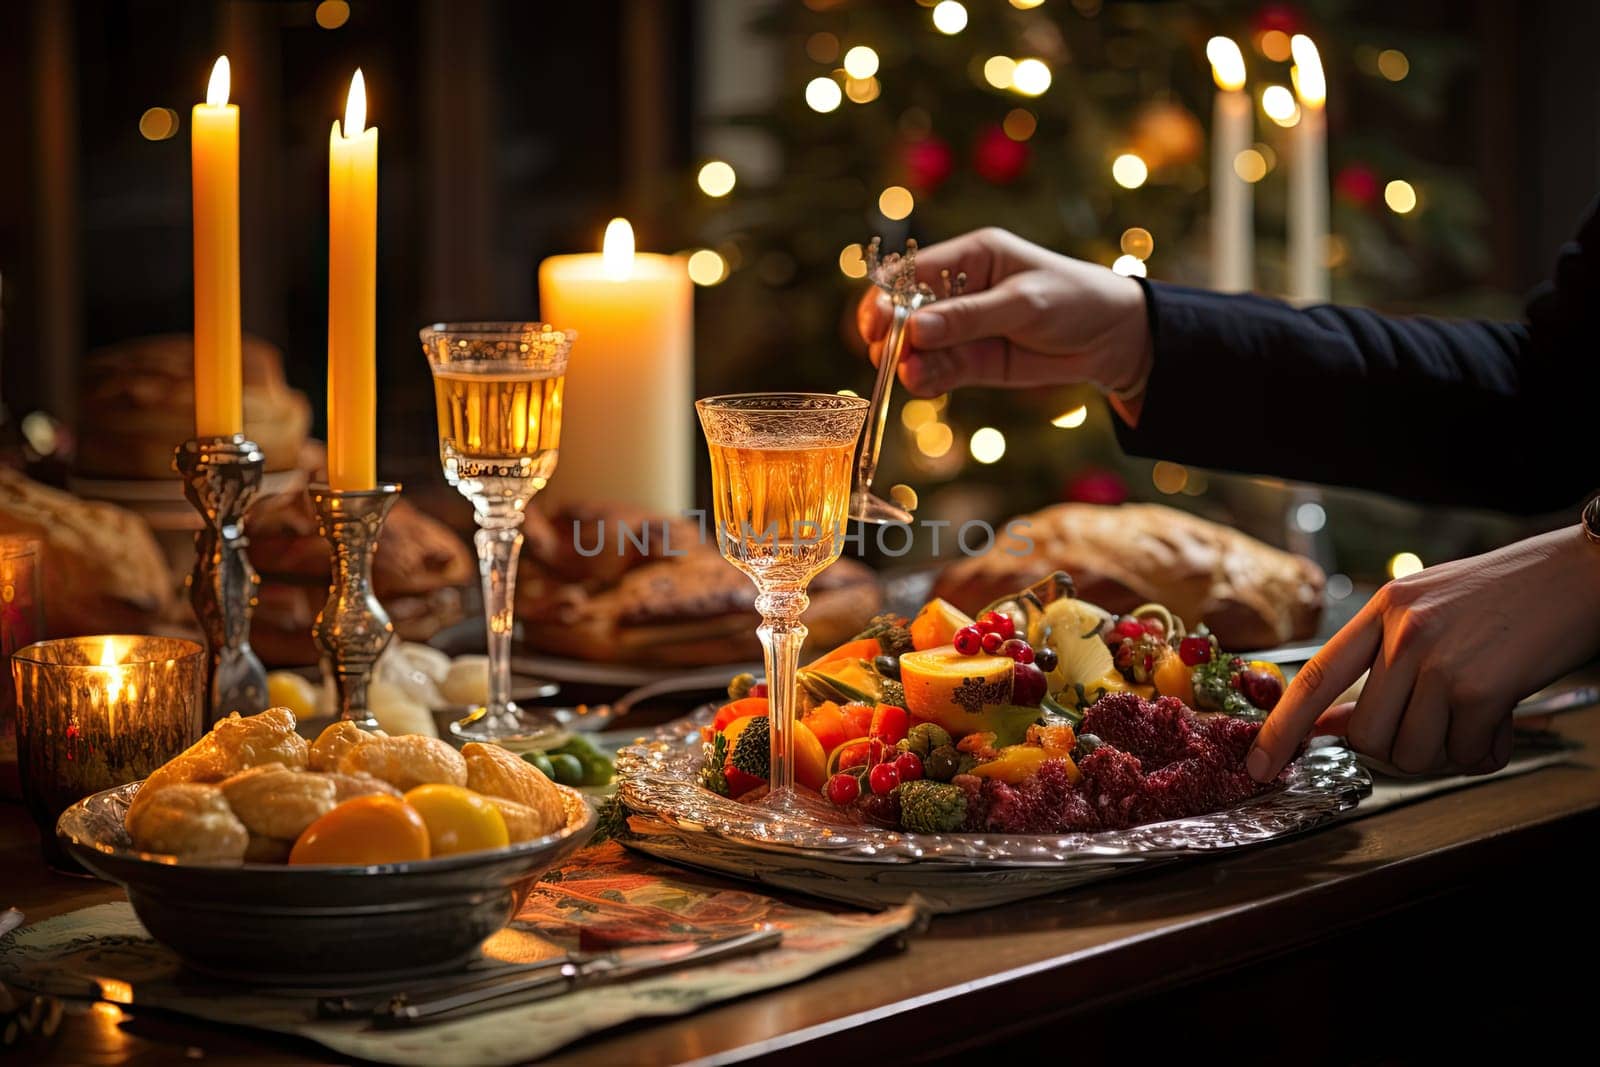 A Festive Feast: Table Overflowing with Delectable Food, Glowing Candles, and a Majestic Christmas Tree